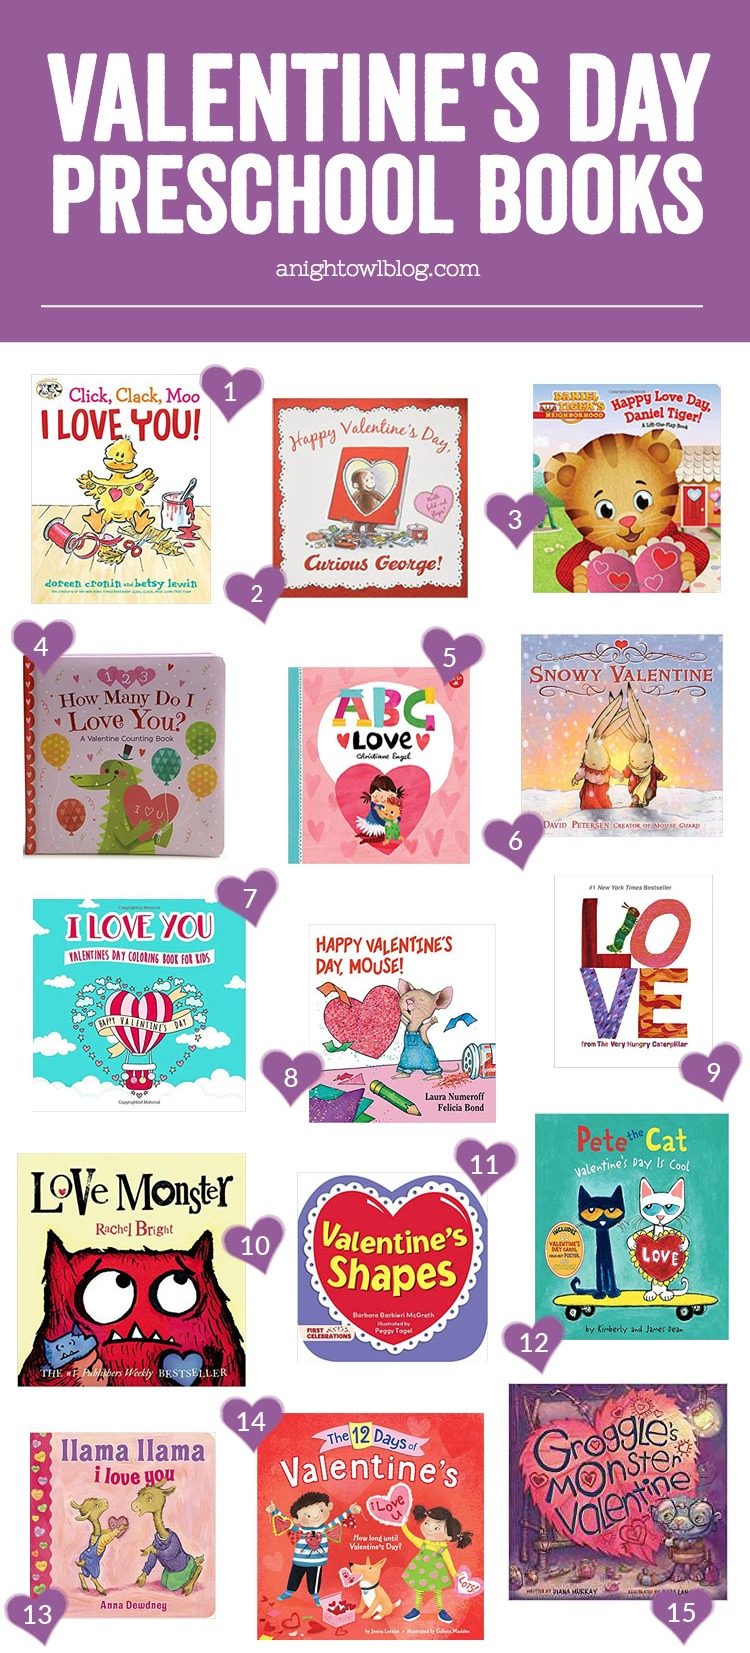 Your little ones will love reading books from this fun and festive list of Valentine's Day Books for Preschoolers!